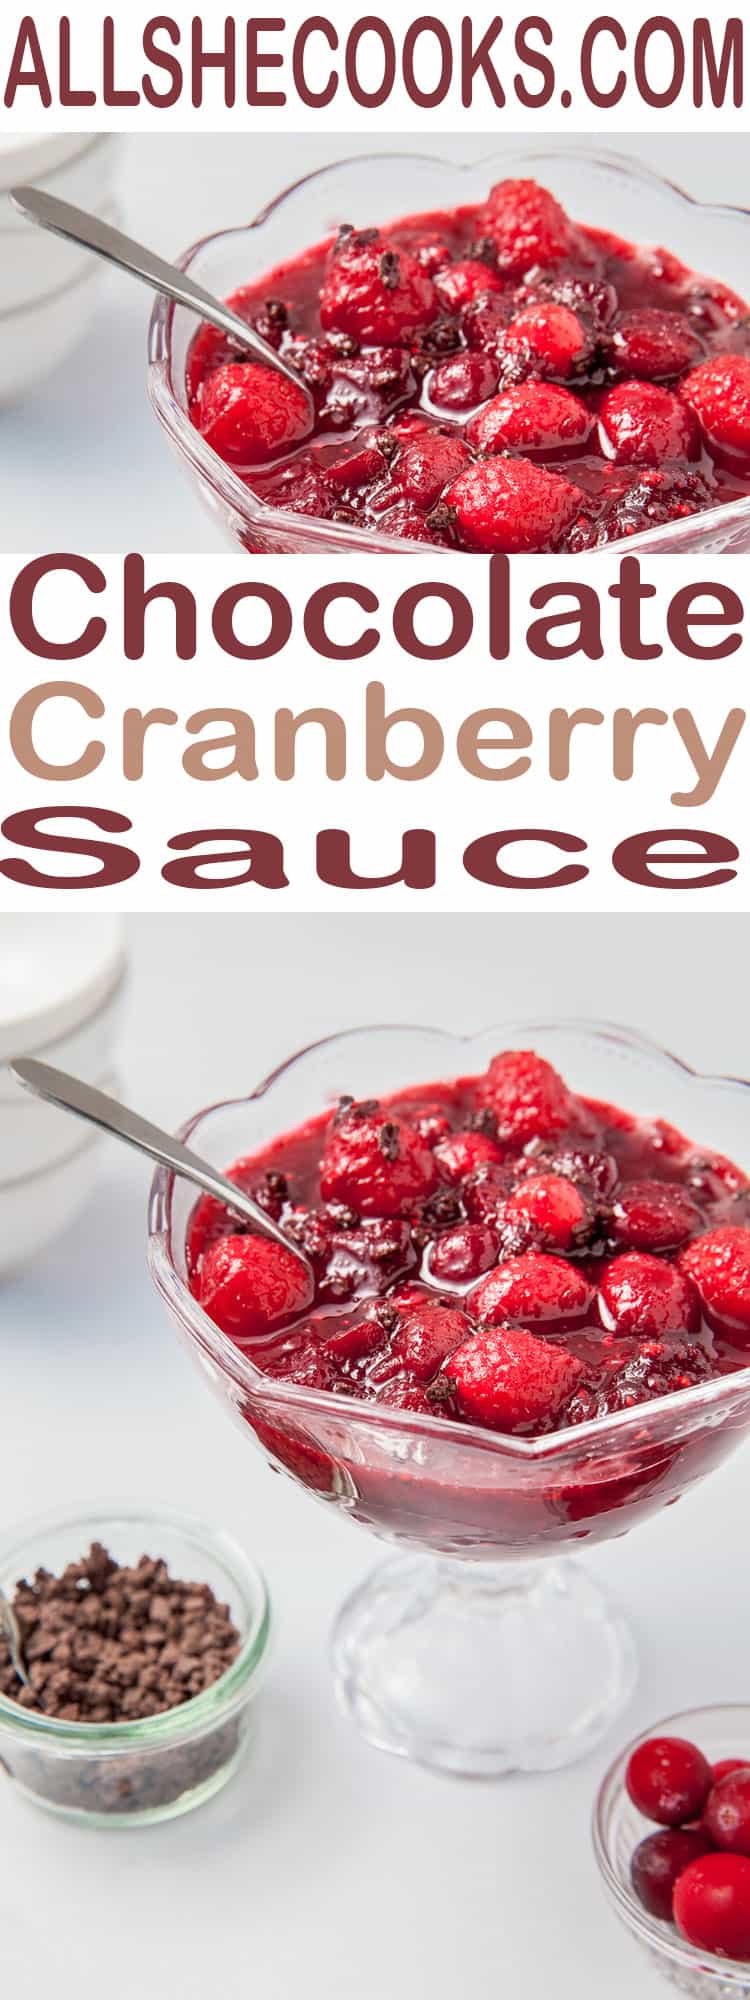 Learn how to make cranberry sauce with chocolate. This cranberry sauce is a fun and tasty twist on a classic holiday recipe. Perfect cranberry sauce for Thanksgiving. #cranberries #saucerecipes